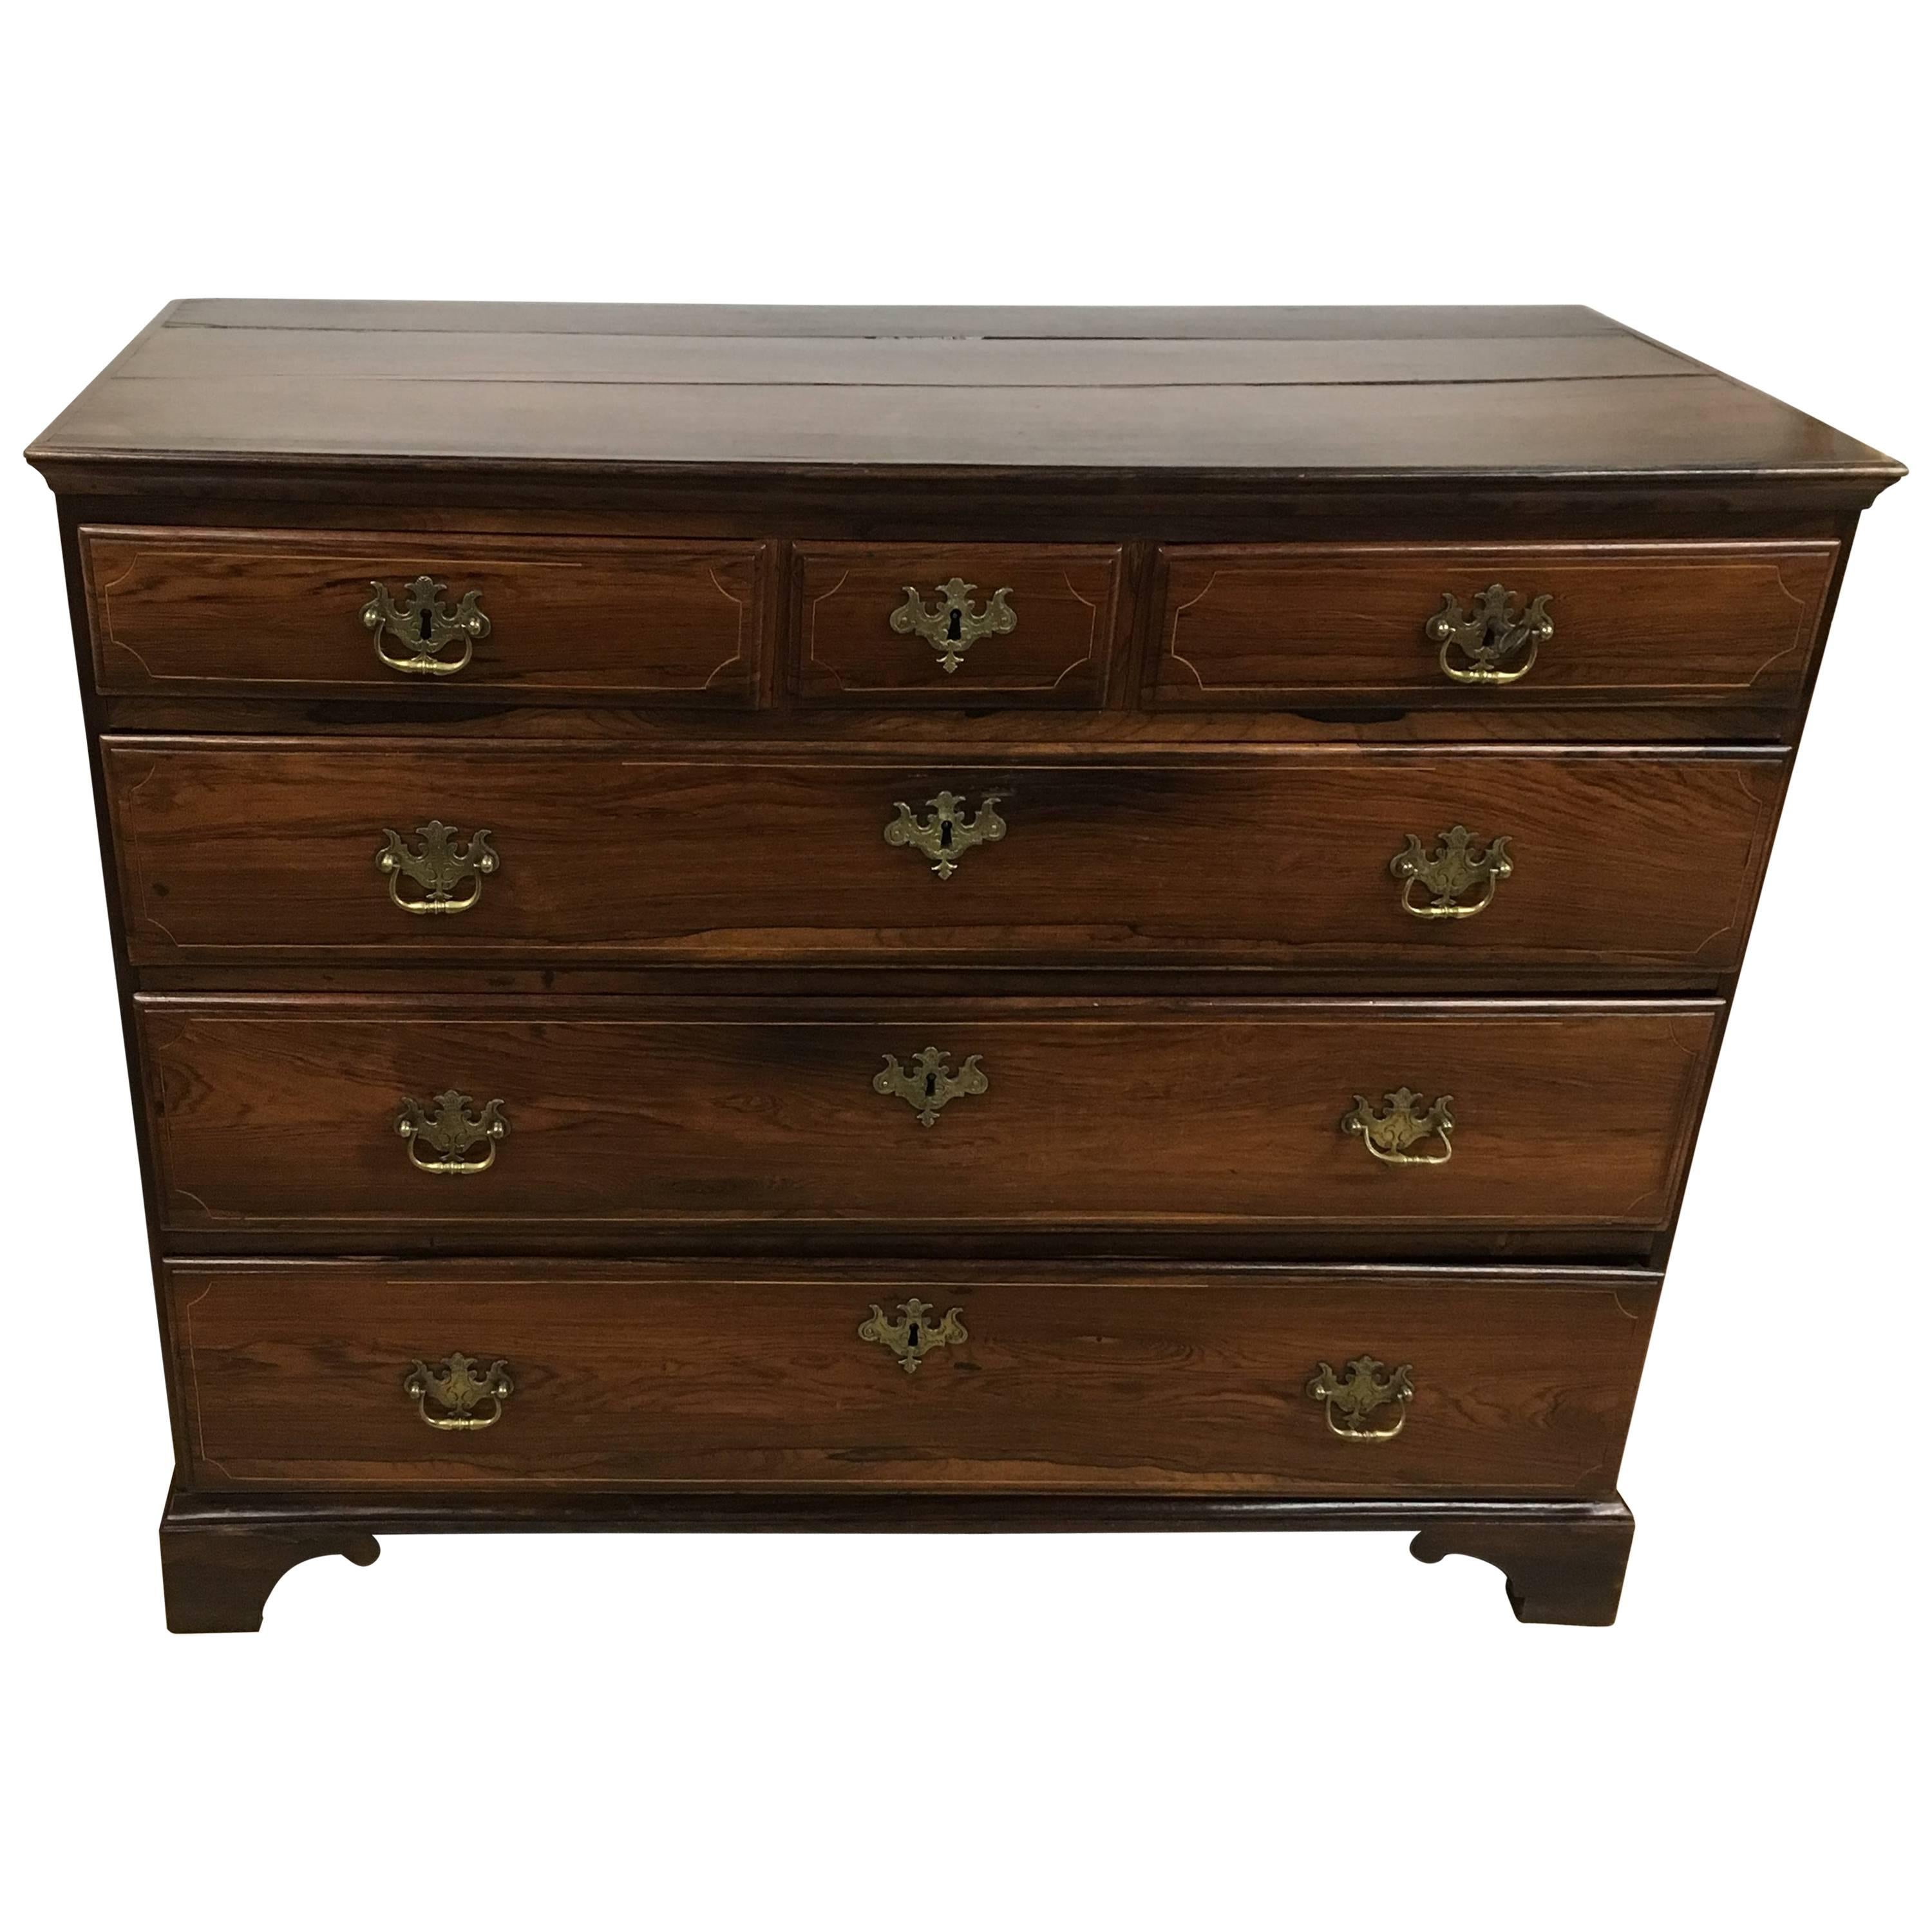 19th Century Portuguese Rosewood Commode Dressing Chest For Sale